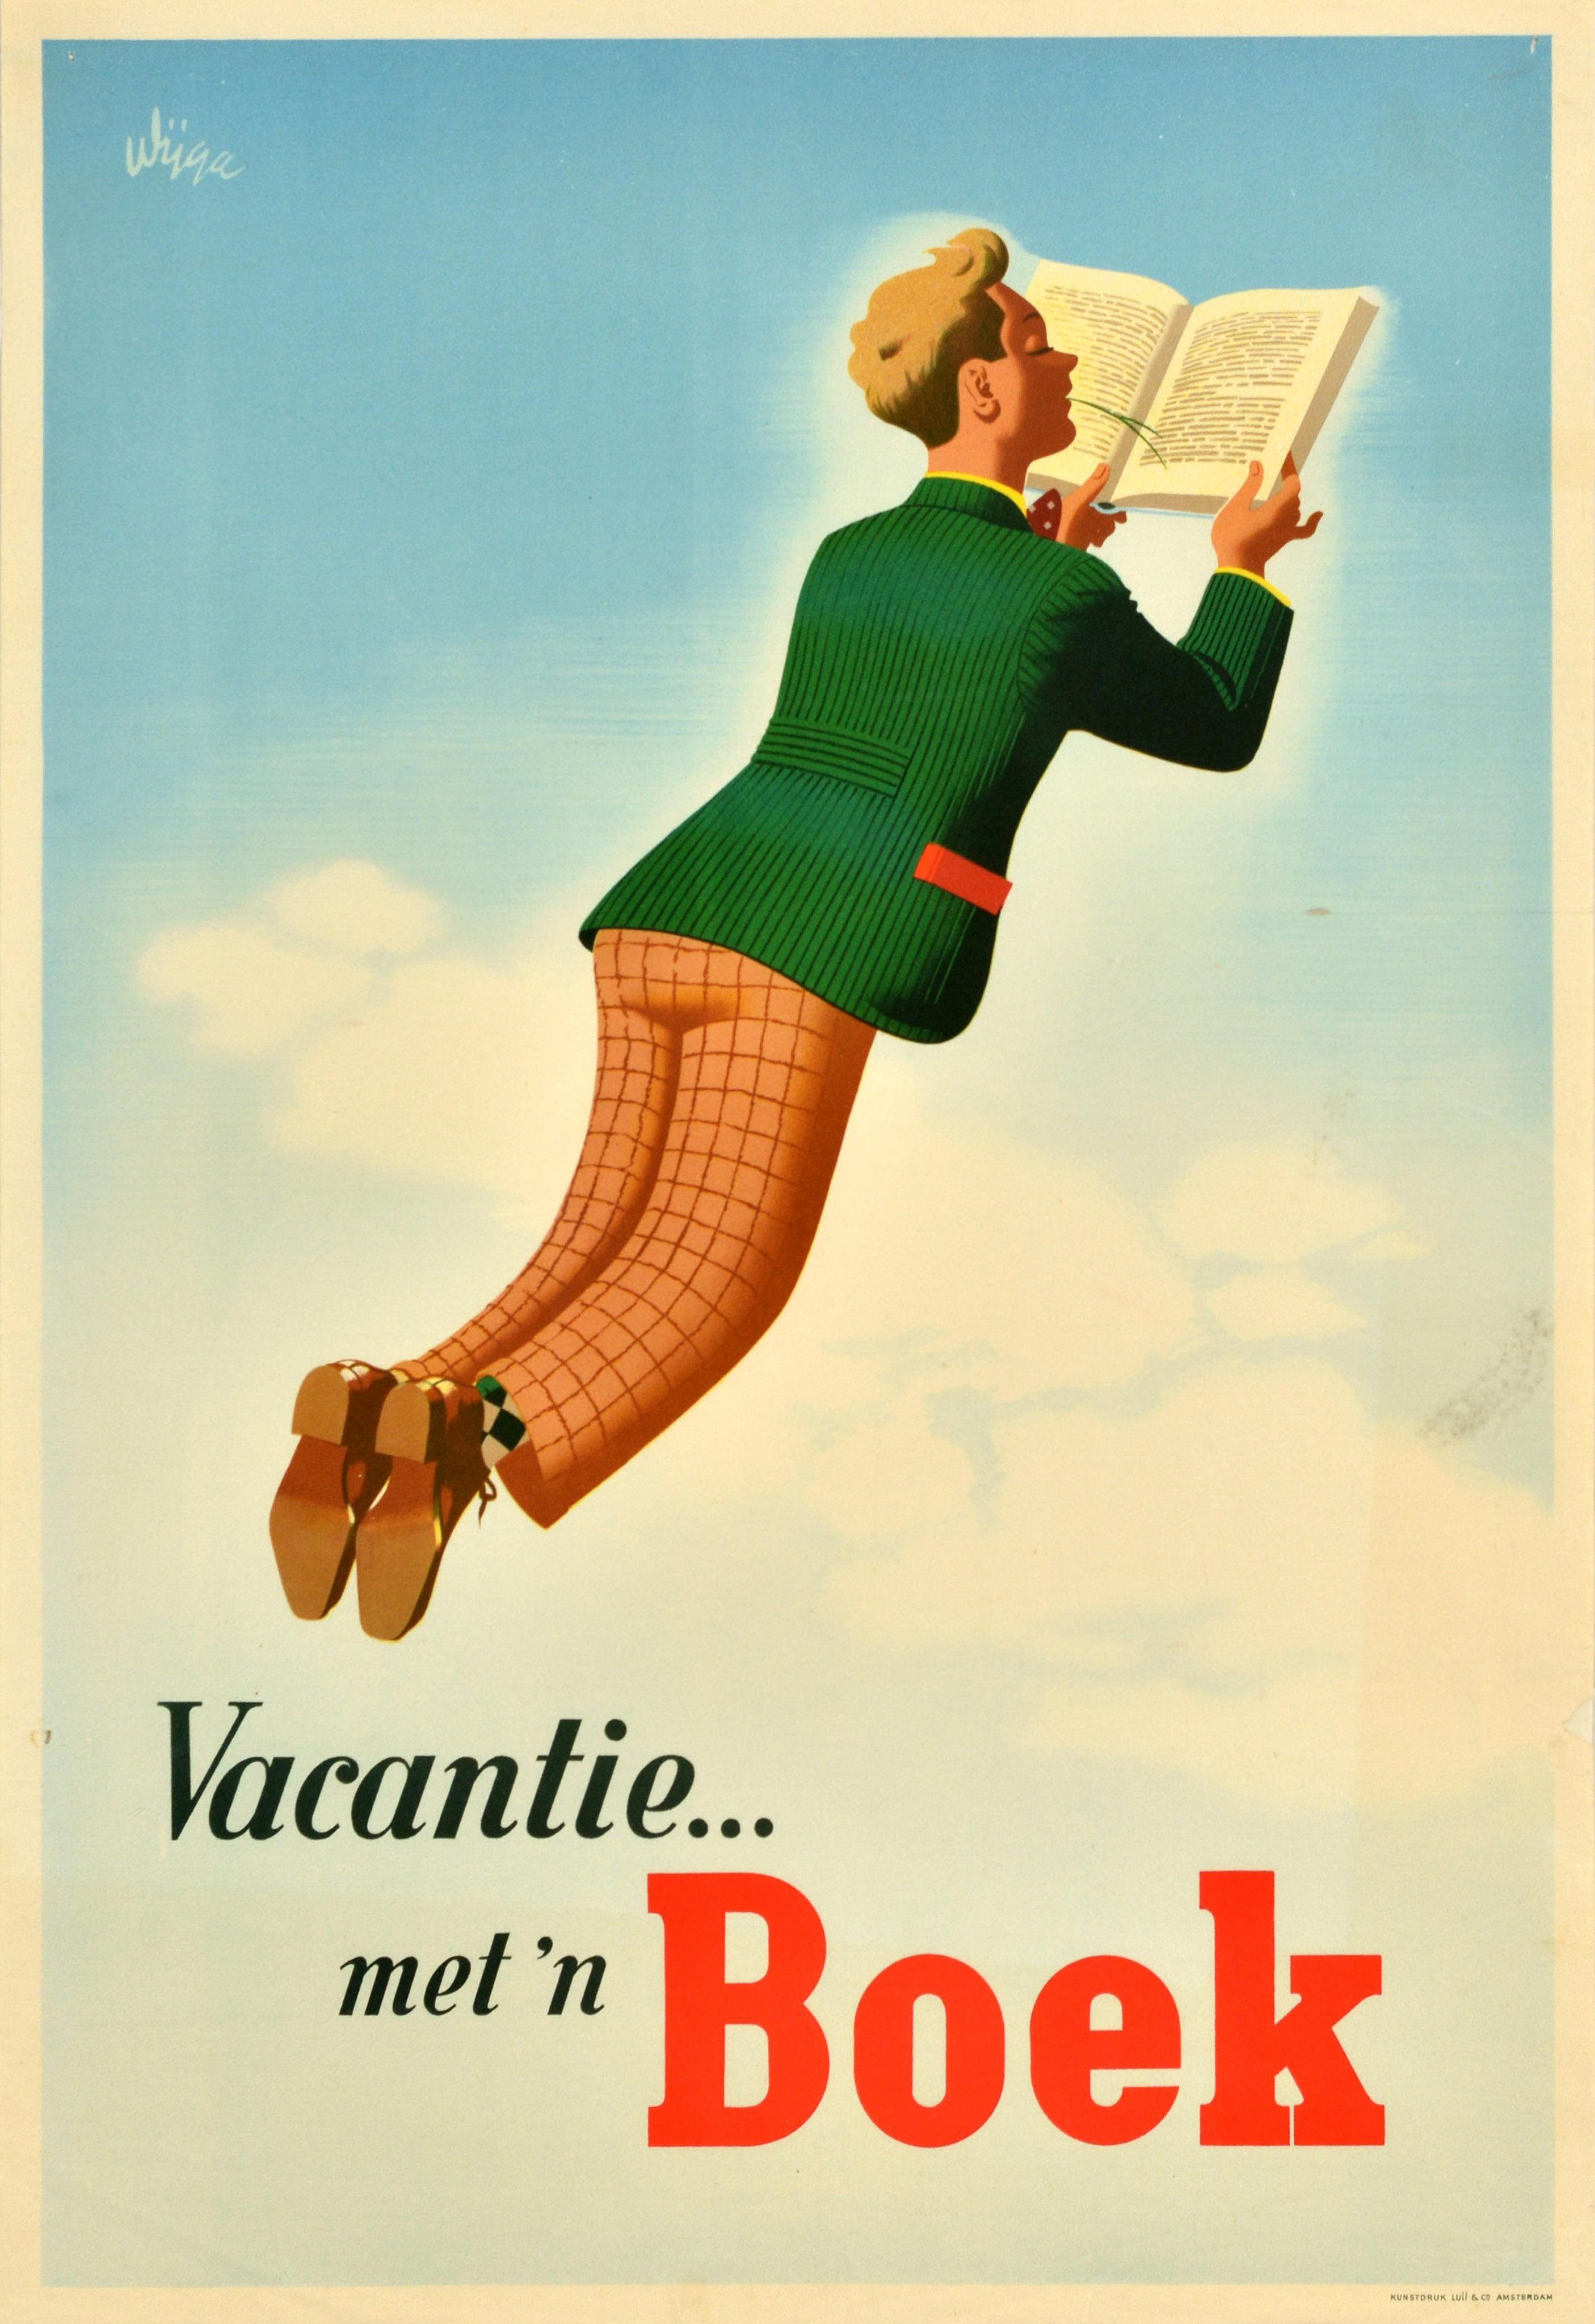 Original vintage advertising poster - Holiday with a Book / Vacantie... met 'n Boek - designed by Jan Wijga (1902-1978) featuring a relaxed man wearing a green jacket and chequered trousers reading a book, lying down floating on a cloud in the sky